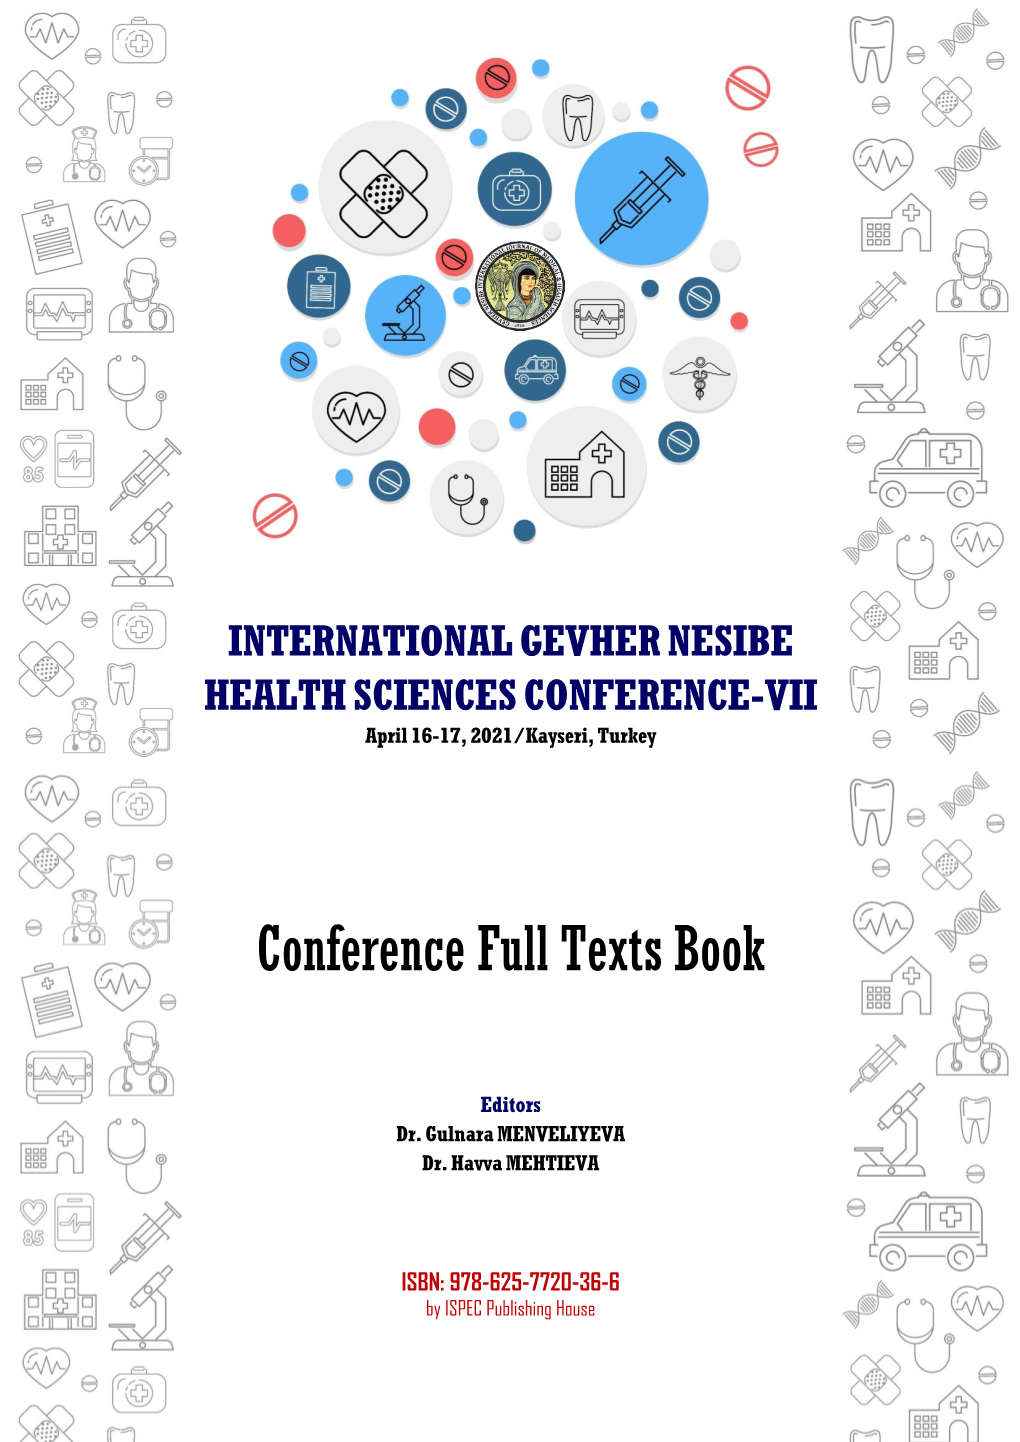 Conference Full Texts Book